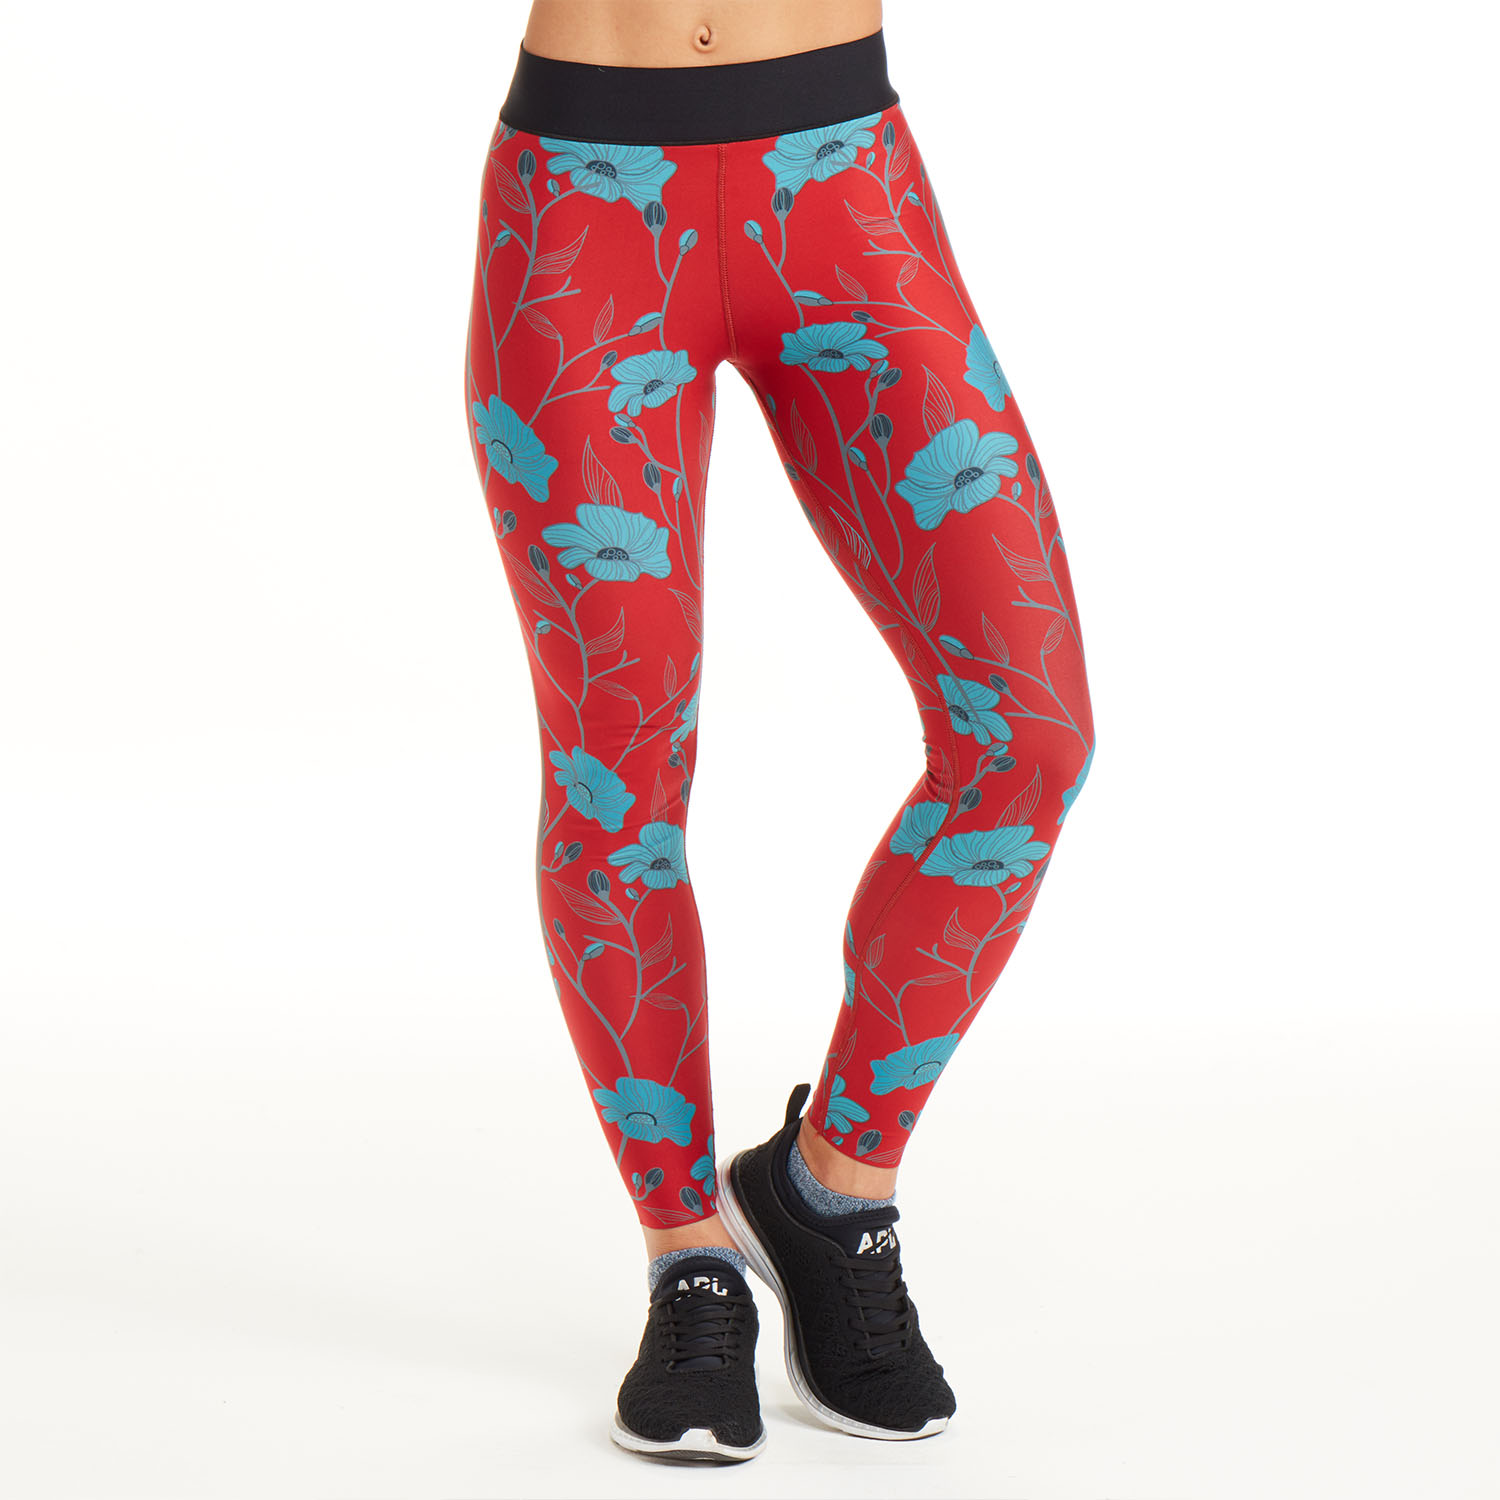 SoulCycle x Ultracor Red Floral Print Legging - SoulCycle Shop